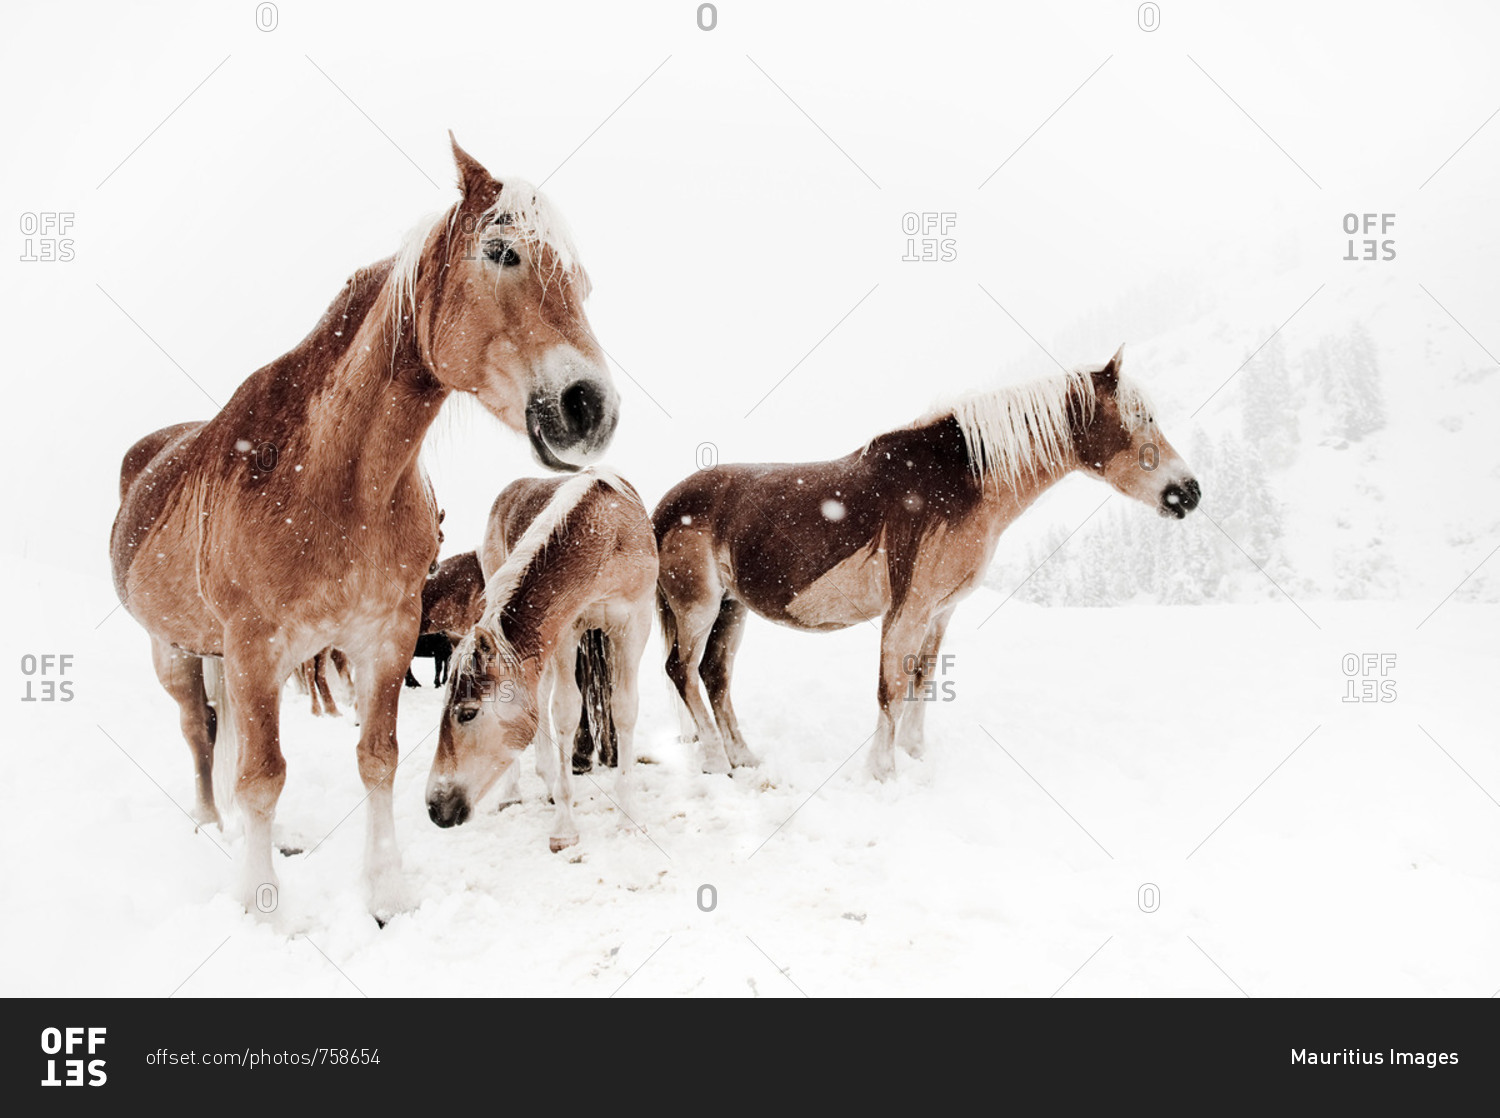 Picture serial of a group of Haflinger horses and a pony
during it is snowing in white mountain landscape stock photo -
OFFSET